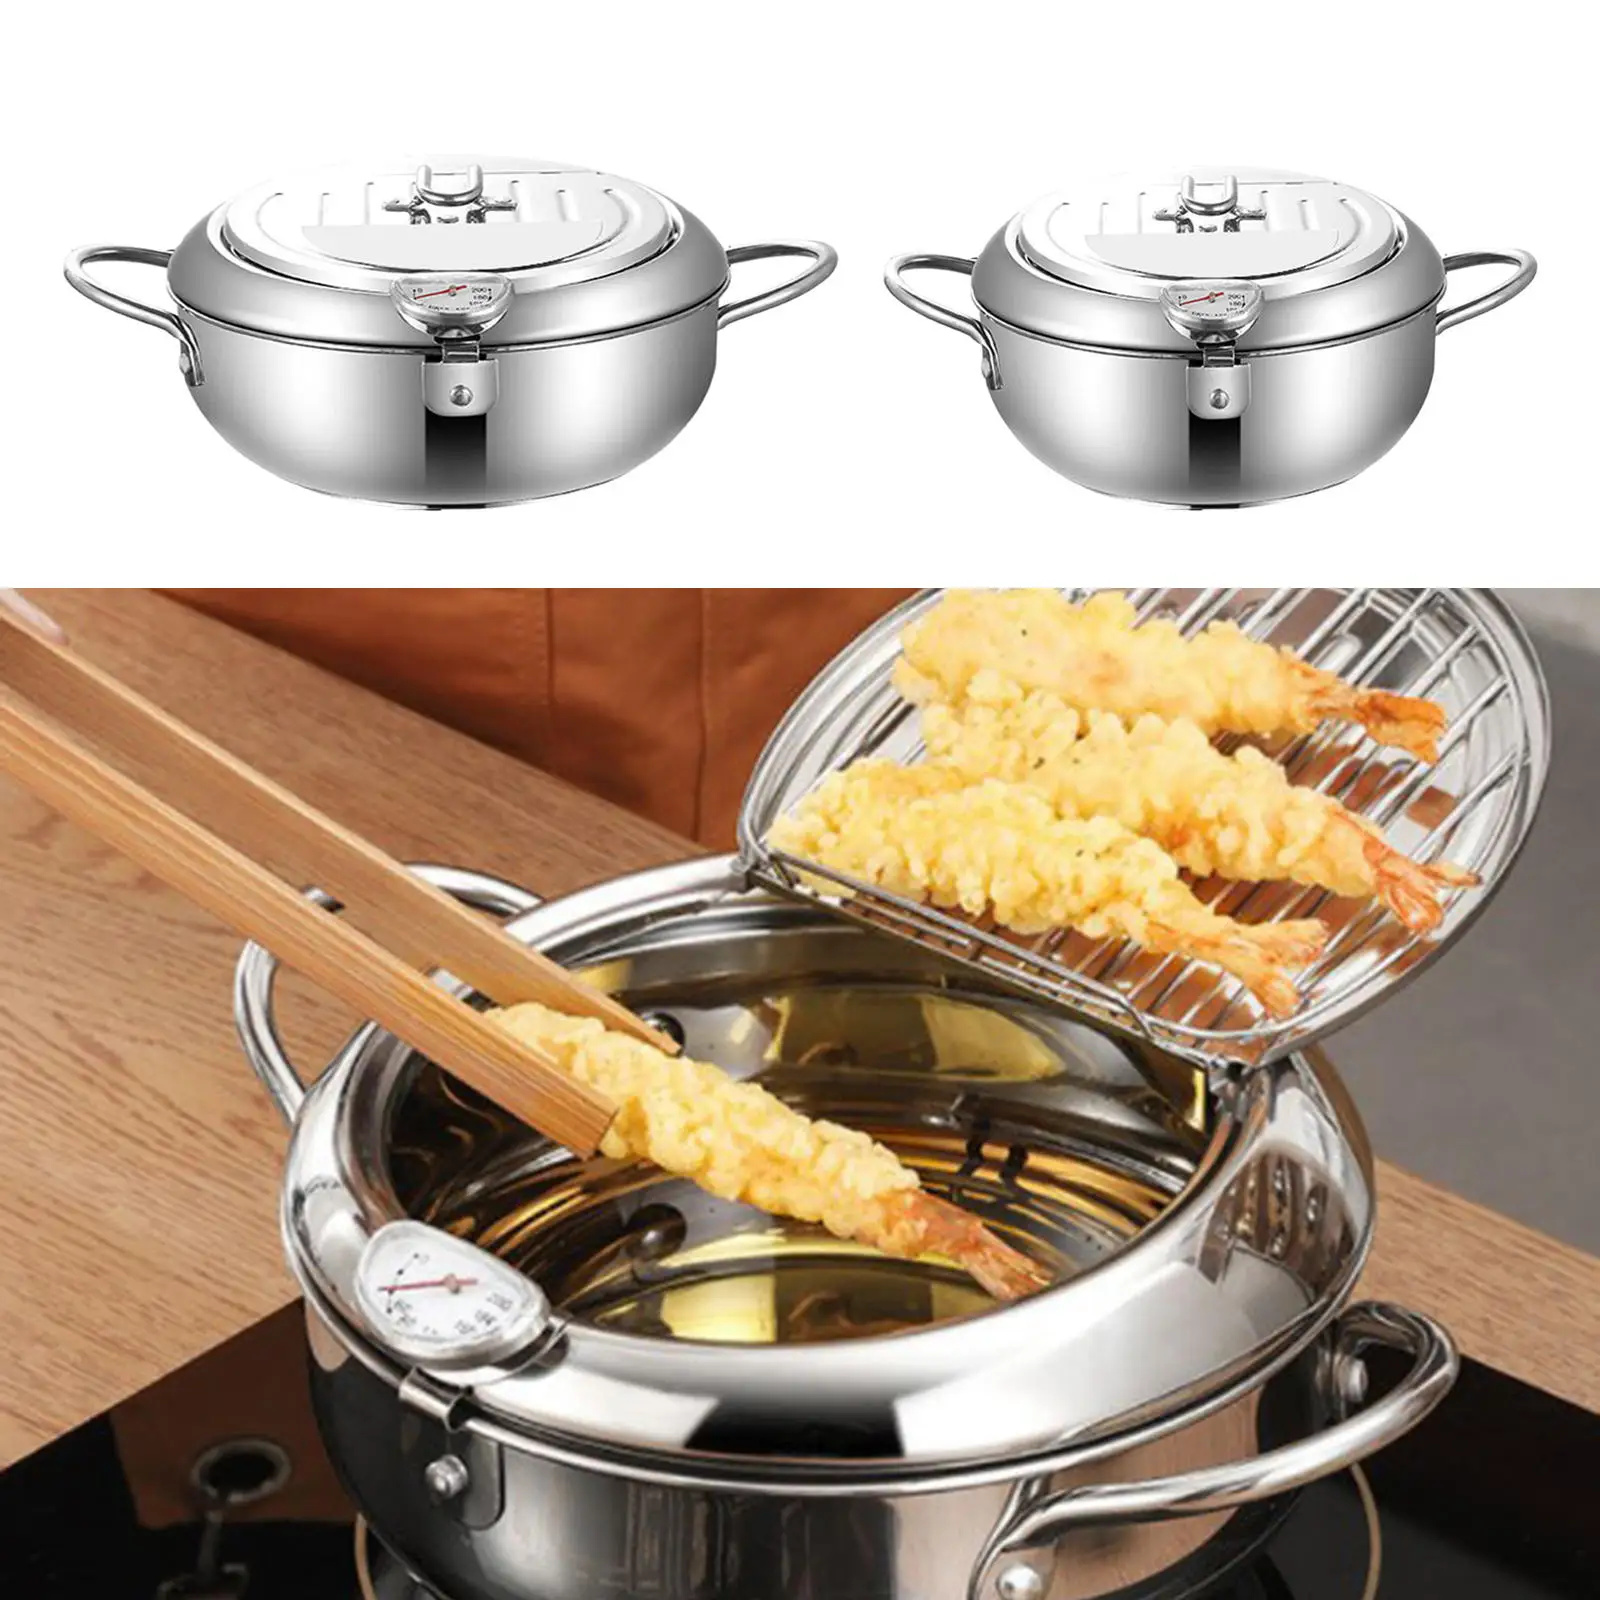 Japanese Style Deep Fryer Pot Cookware Gas Electric Induction Use Tempura Fryer Pan for French Fries Fried Chicken Cooking